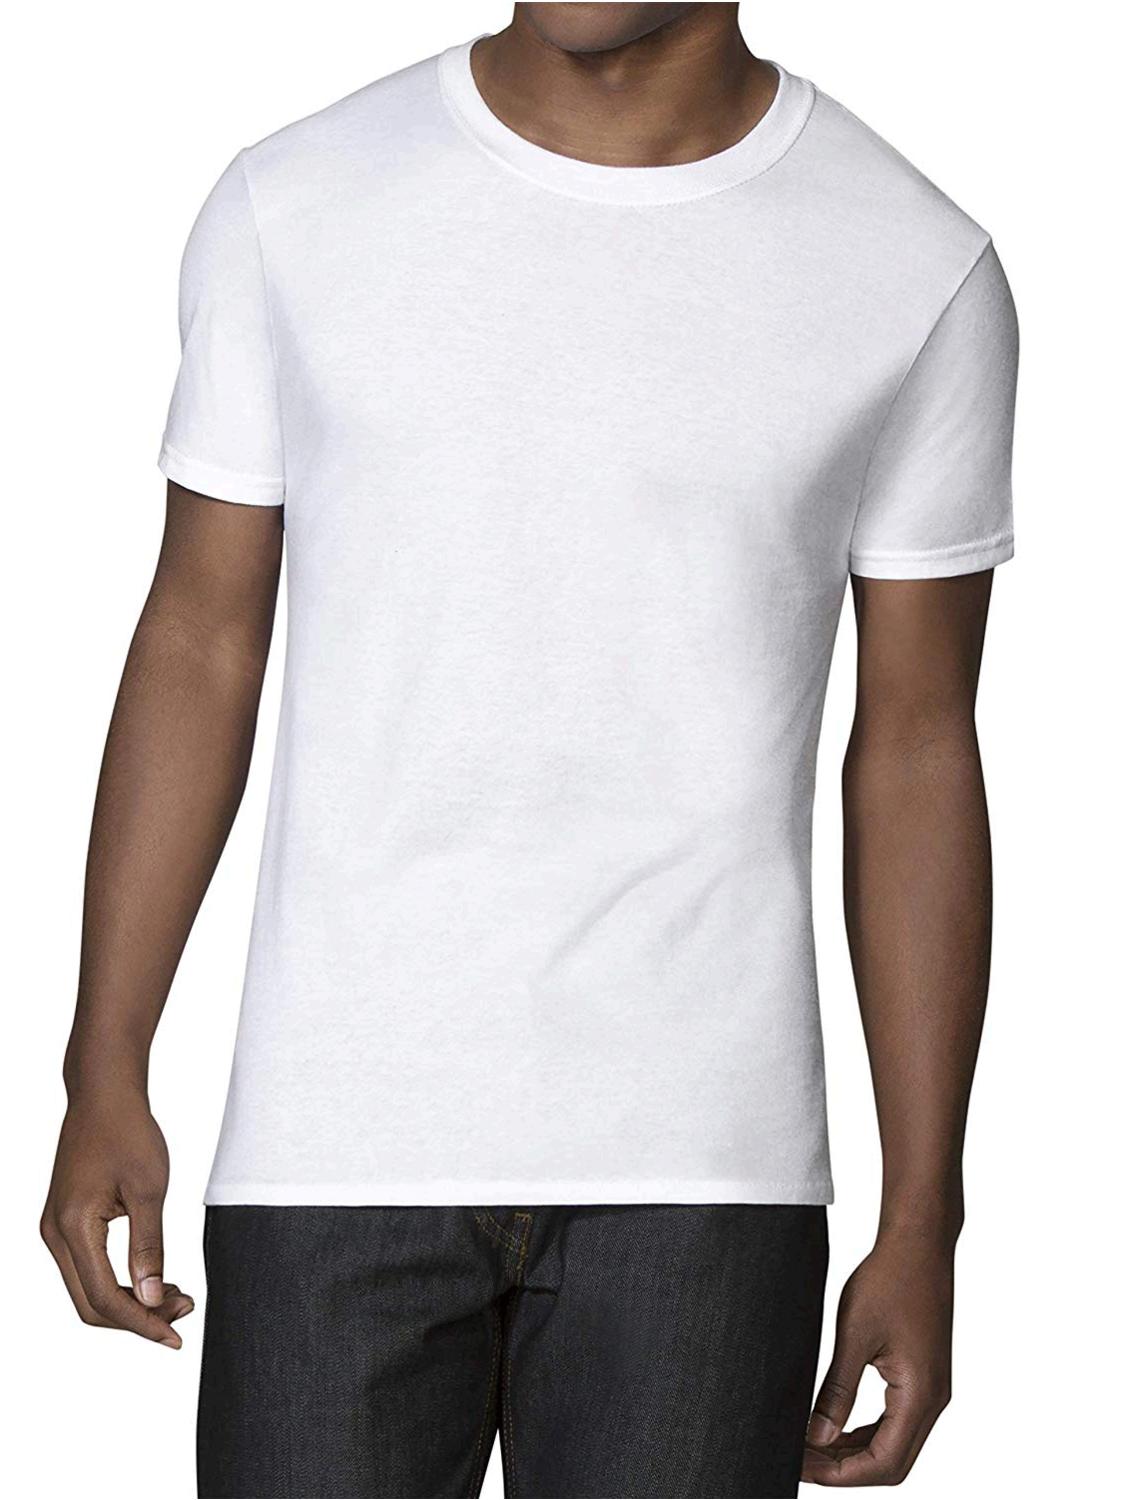 Fruit of the Loom Men's Stay Tucked Crew T-Shirt,, White, Size XX-Large ...